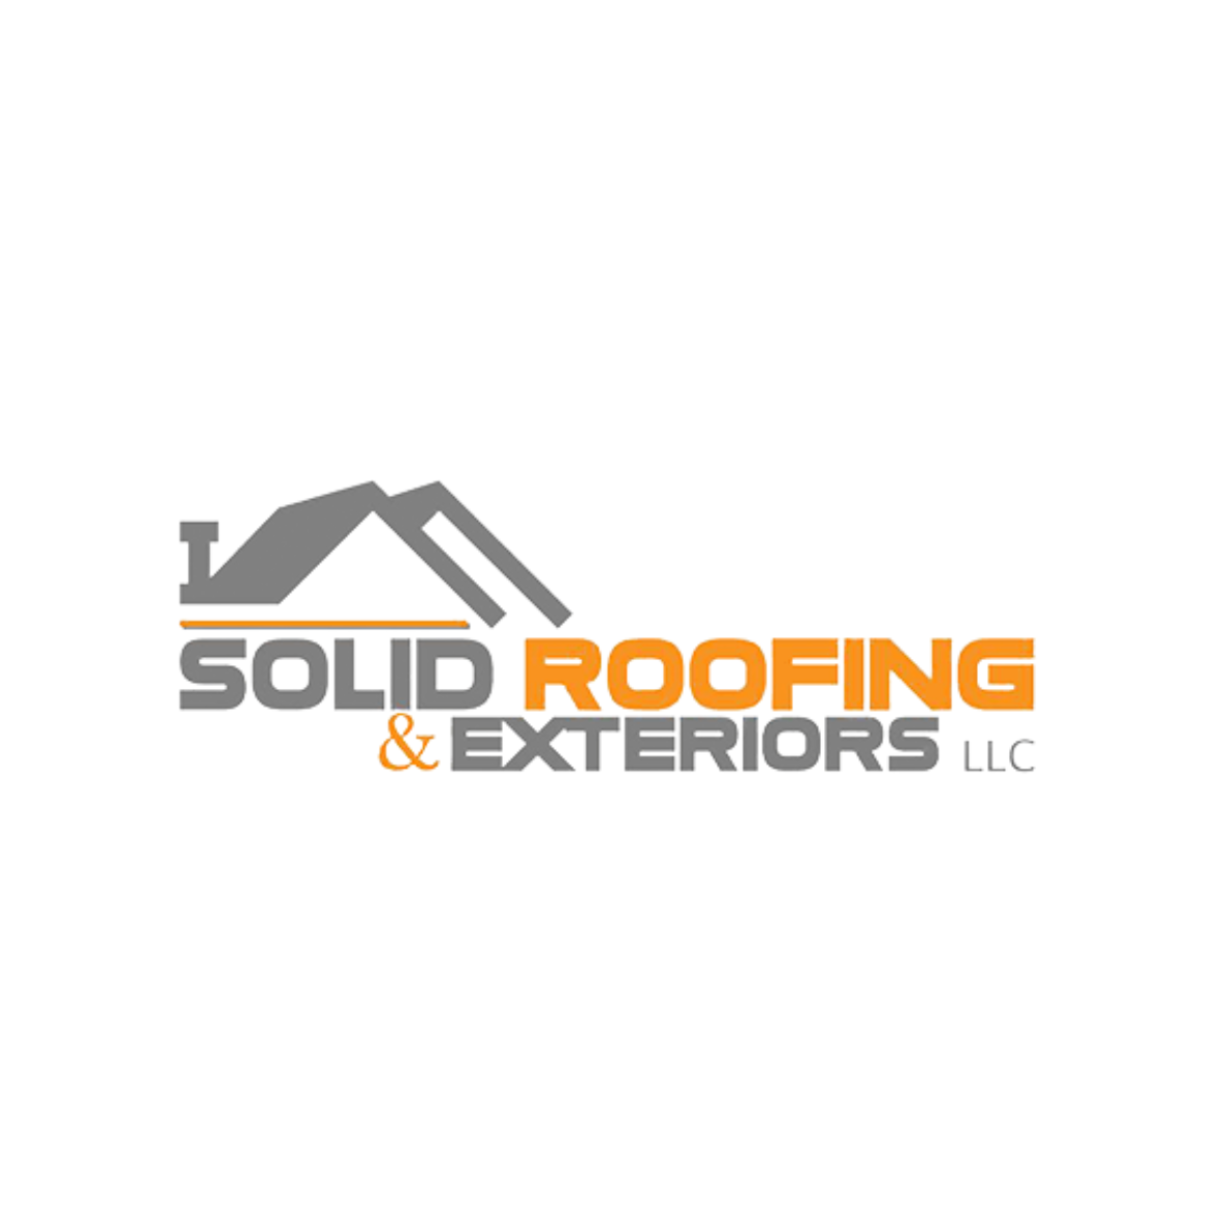 Timber Creek Virtual Online Digital Marketing for Solid Roofing & Exteriors LLC